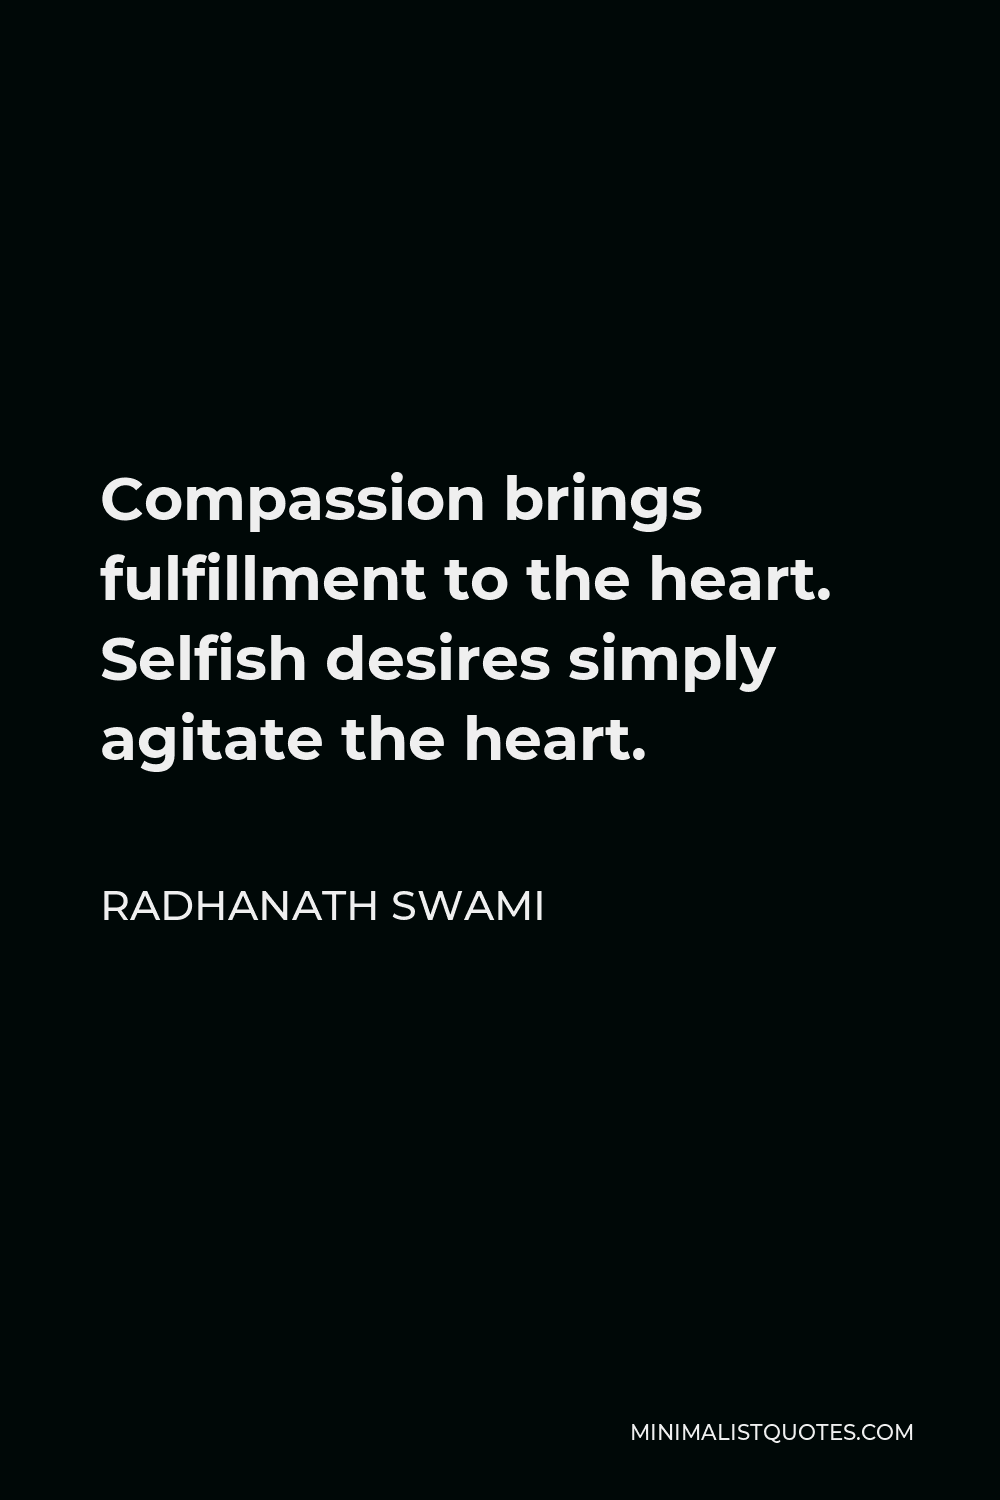 Radhanath Swami Quote - Compassion brings fulfillment to the heart. Selfish desires simply agitate the heart.